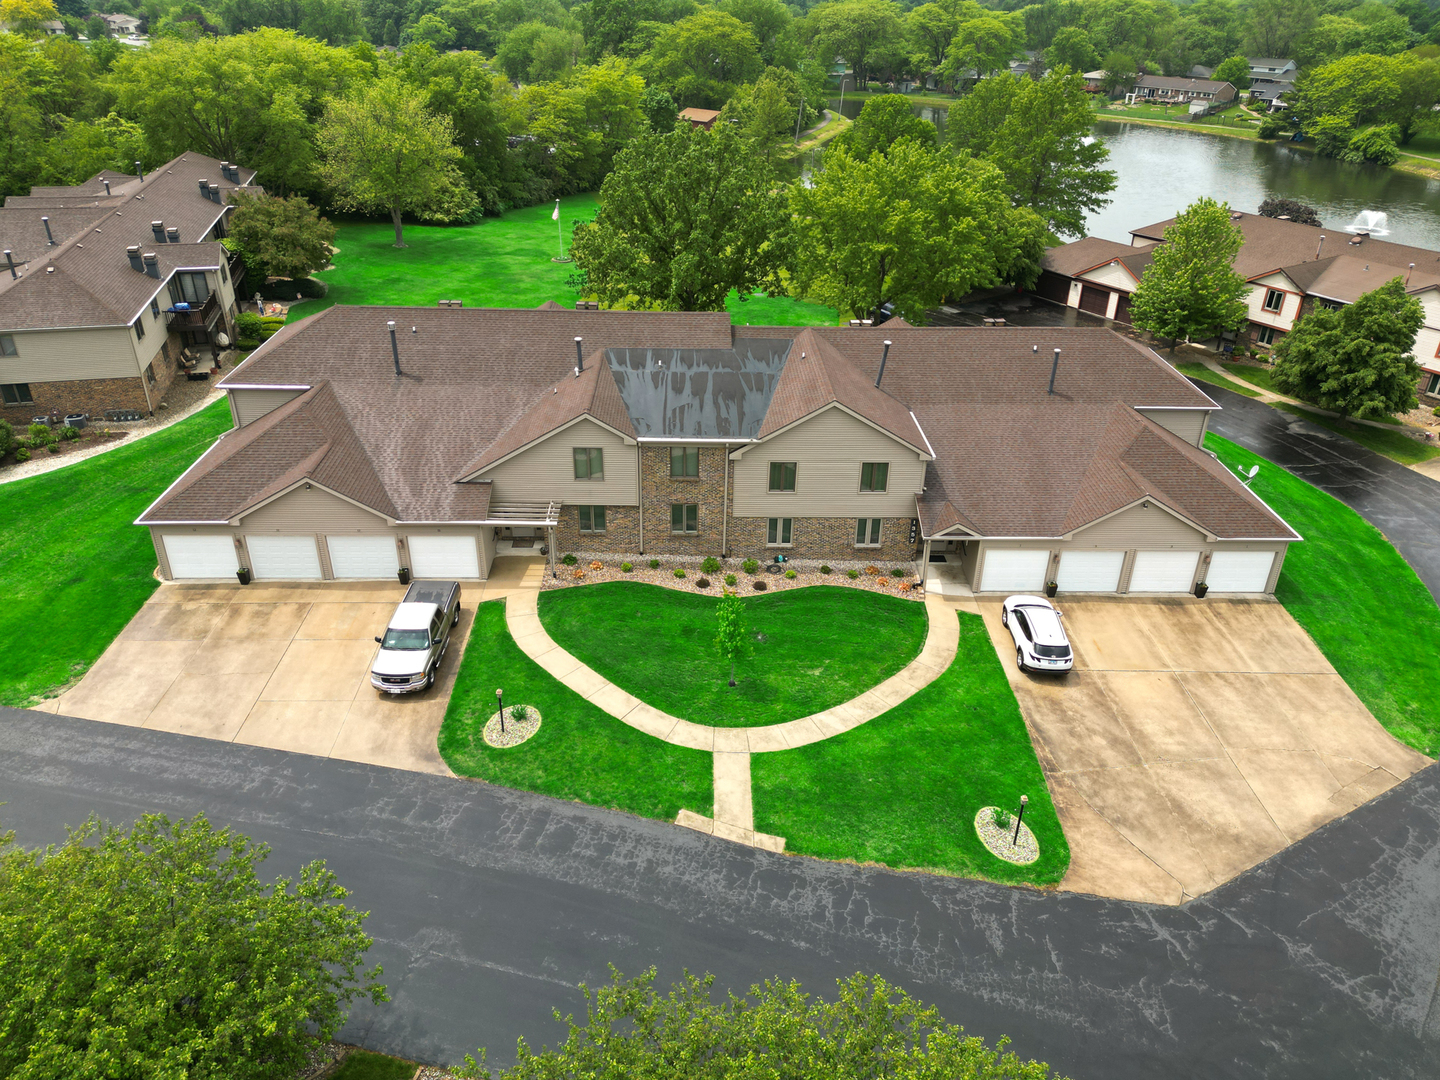 an aerial view of a house with garden